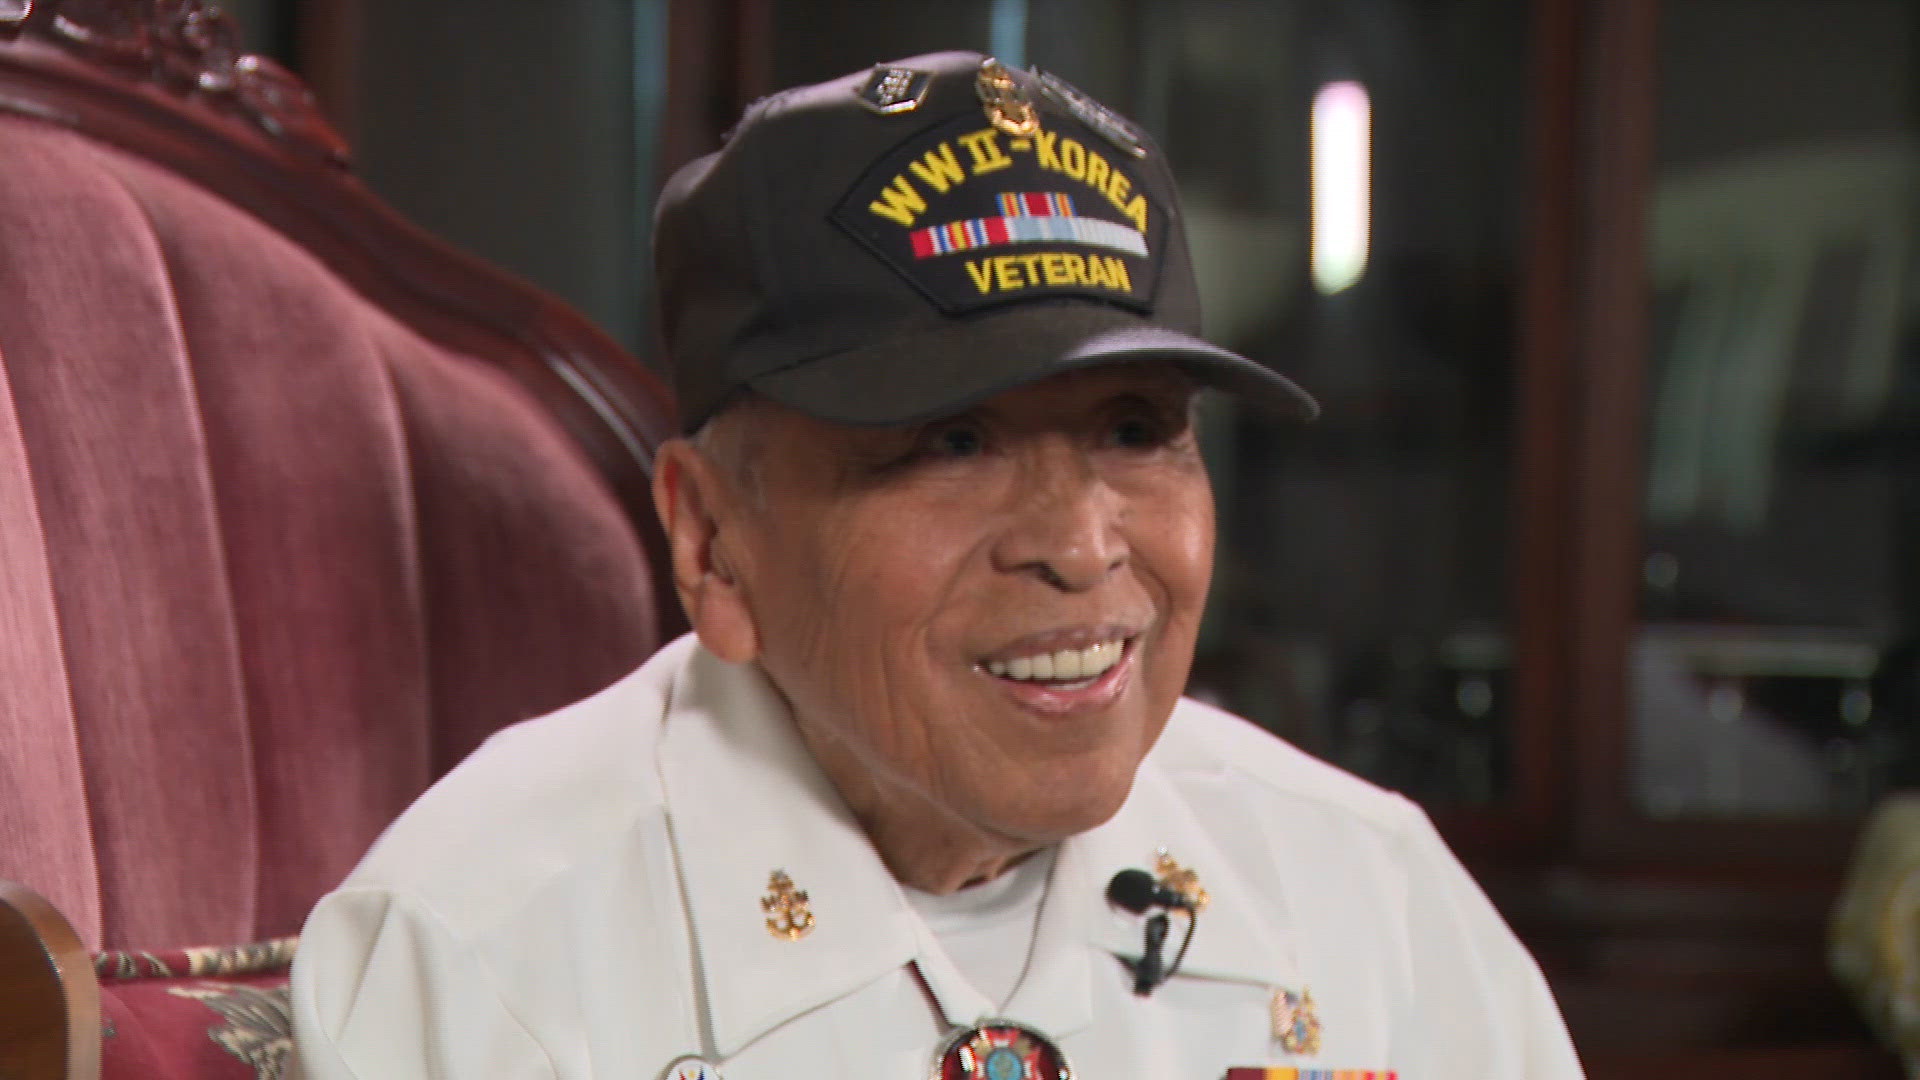 Among the veterans who are pushing for recognition and benefits is Remigio Cabacar, one of two living Filipino veterans in the D.C. region.